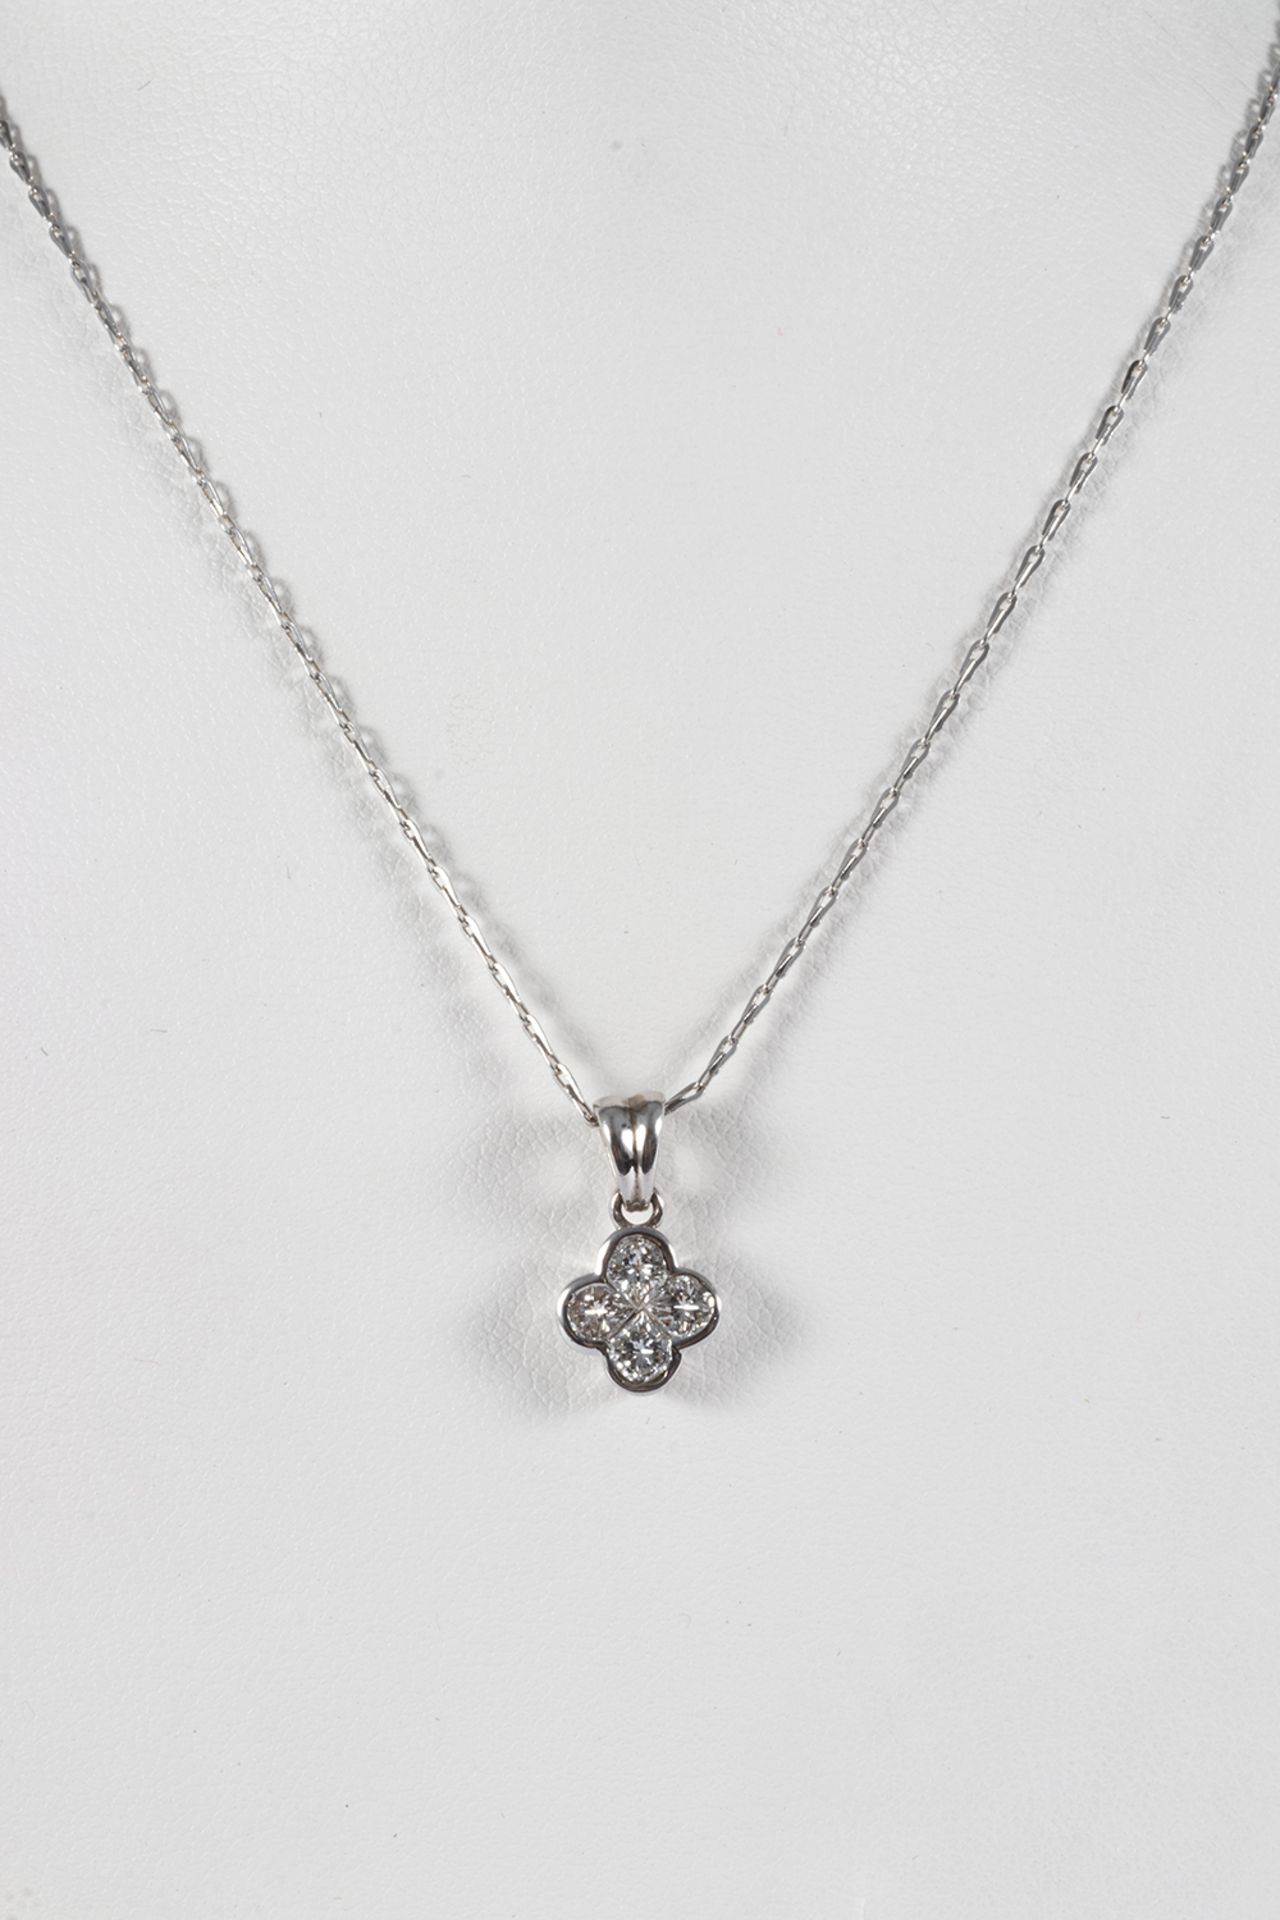 Pendant with chain in white gold and goatee-cut diamonds. - Bild 2 aus 2